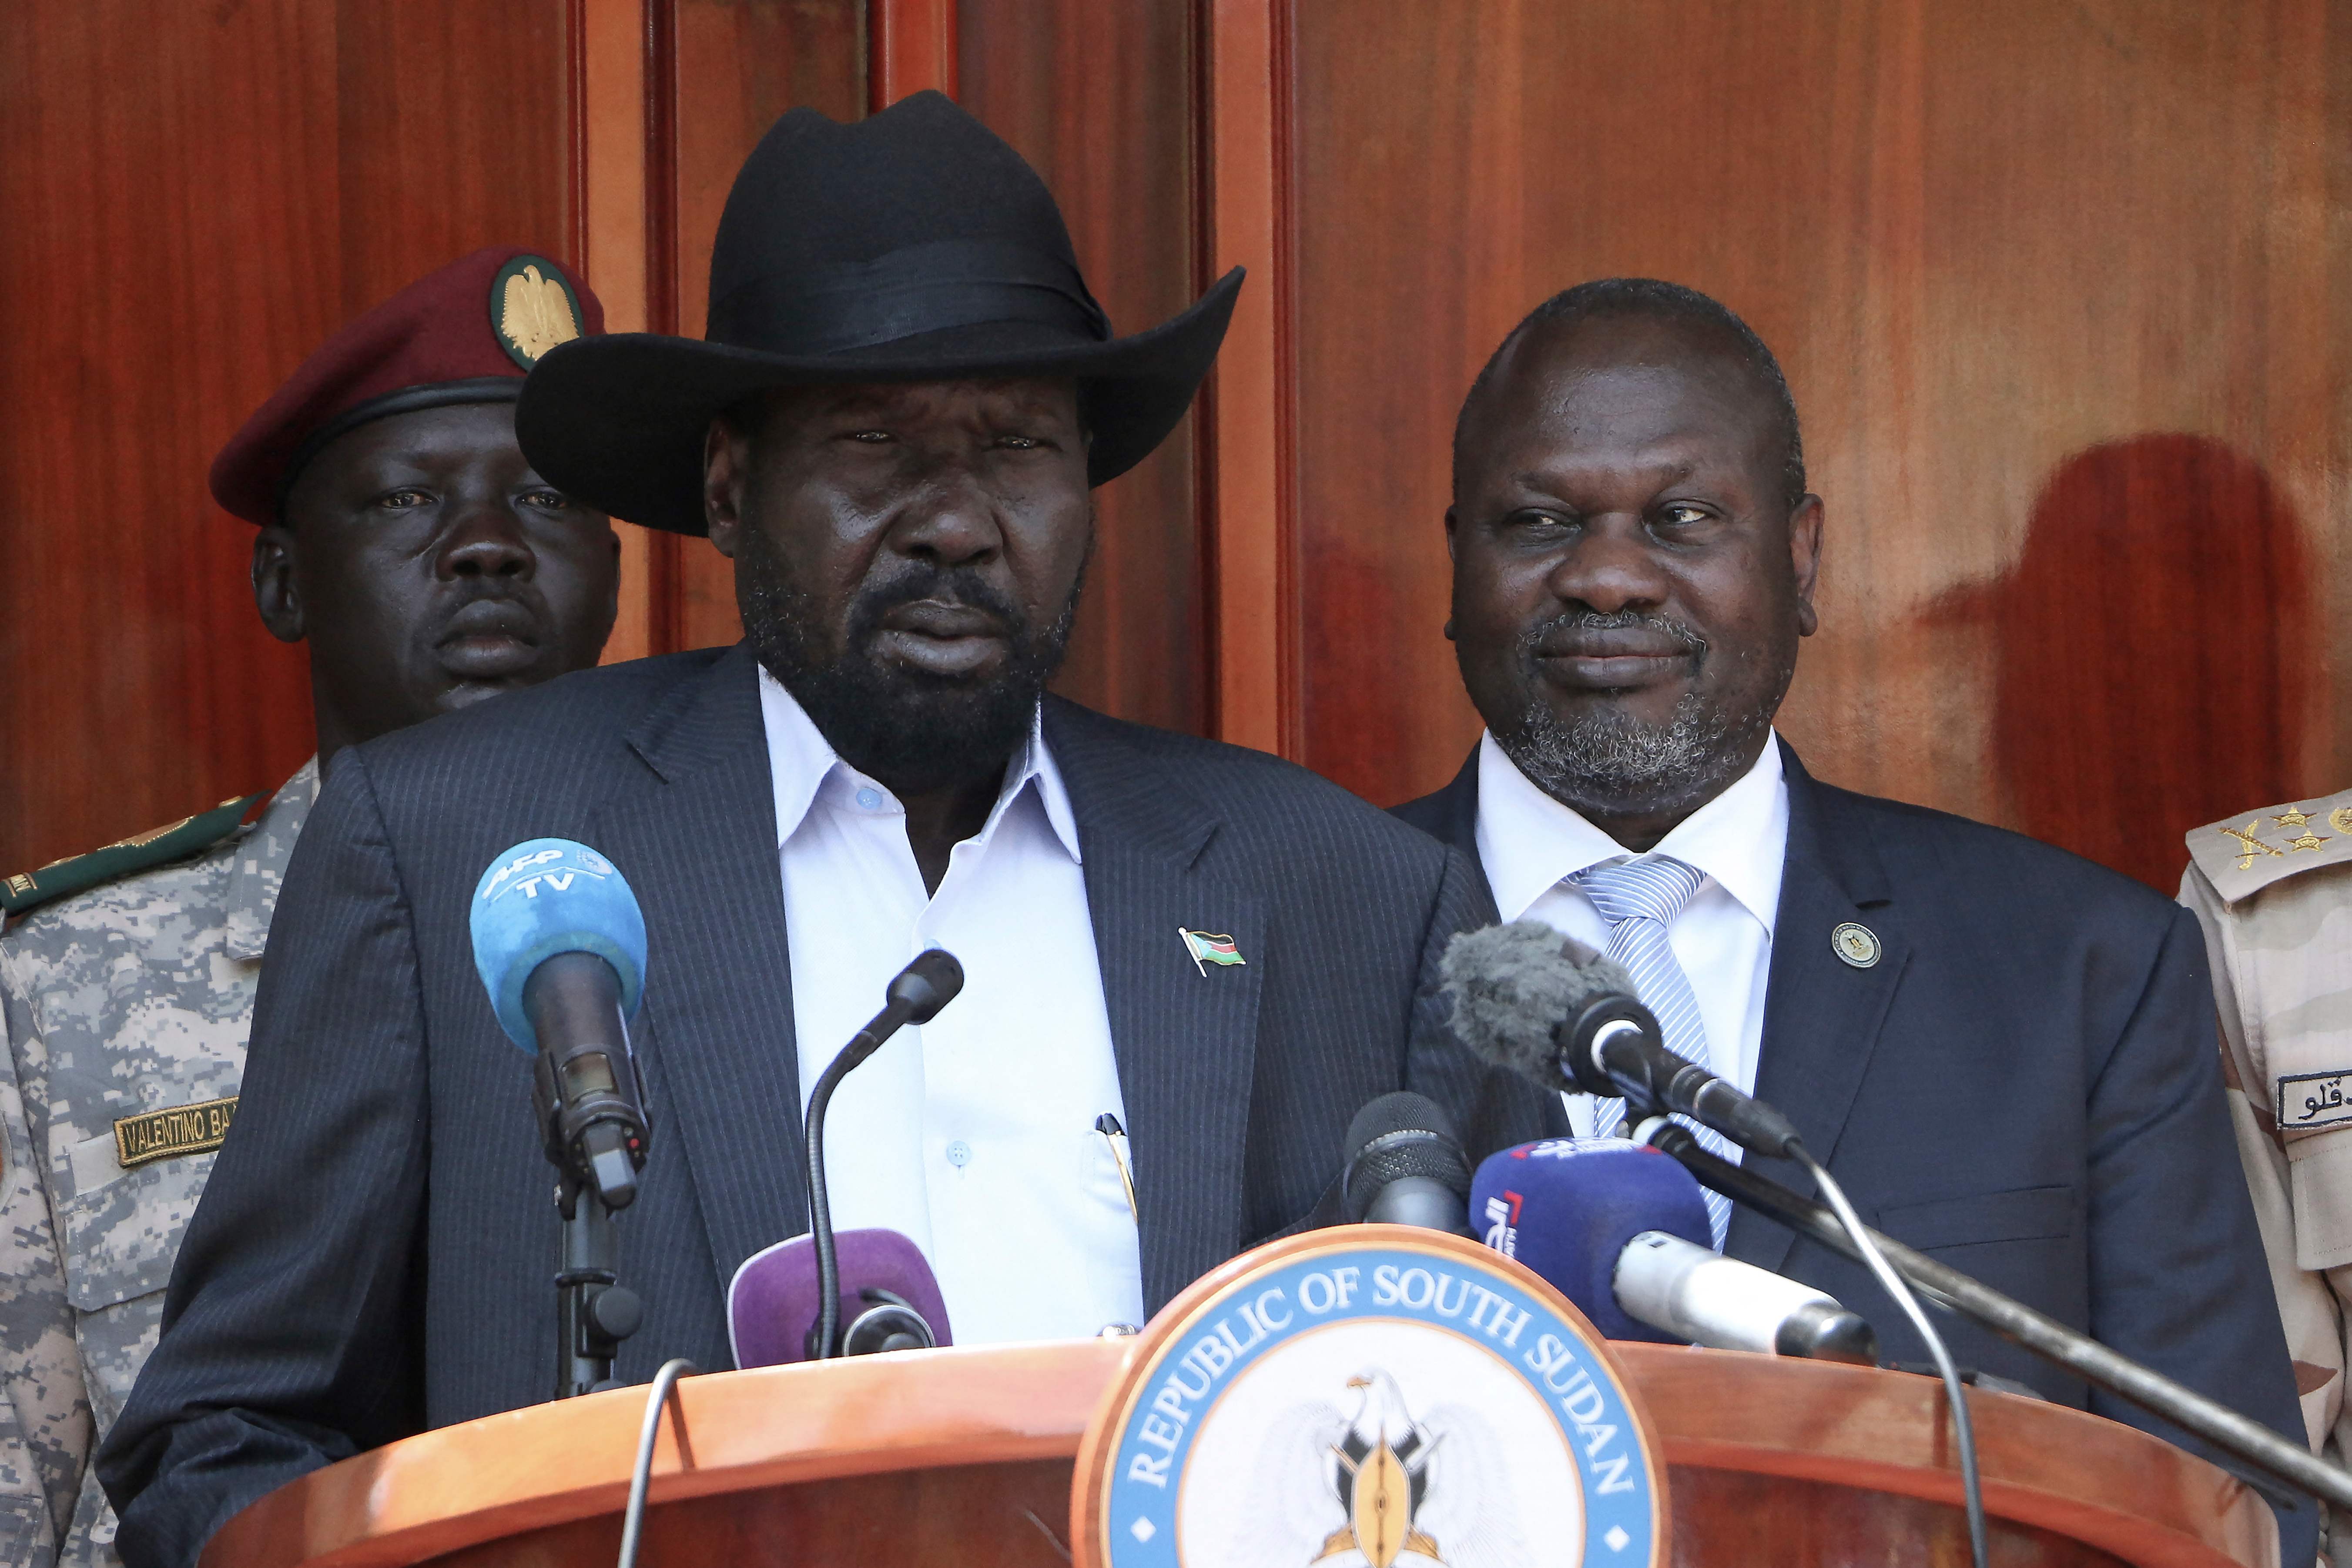 South Sudan President Salva Kiir (C) gives a press conference jointly with his former vice-president and political rival Riek Machar (R) after they met at the State House in Juba, where they confirmed that they had agreed to a joint government in February 2020